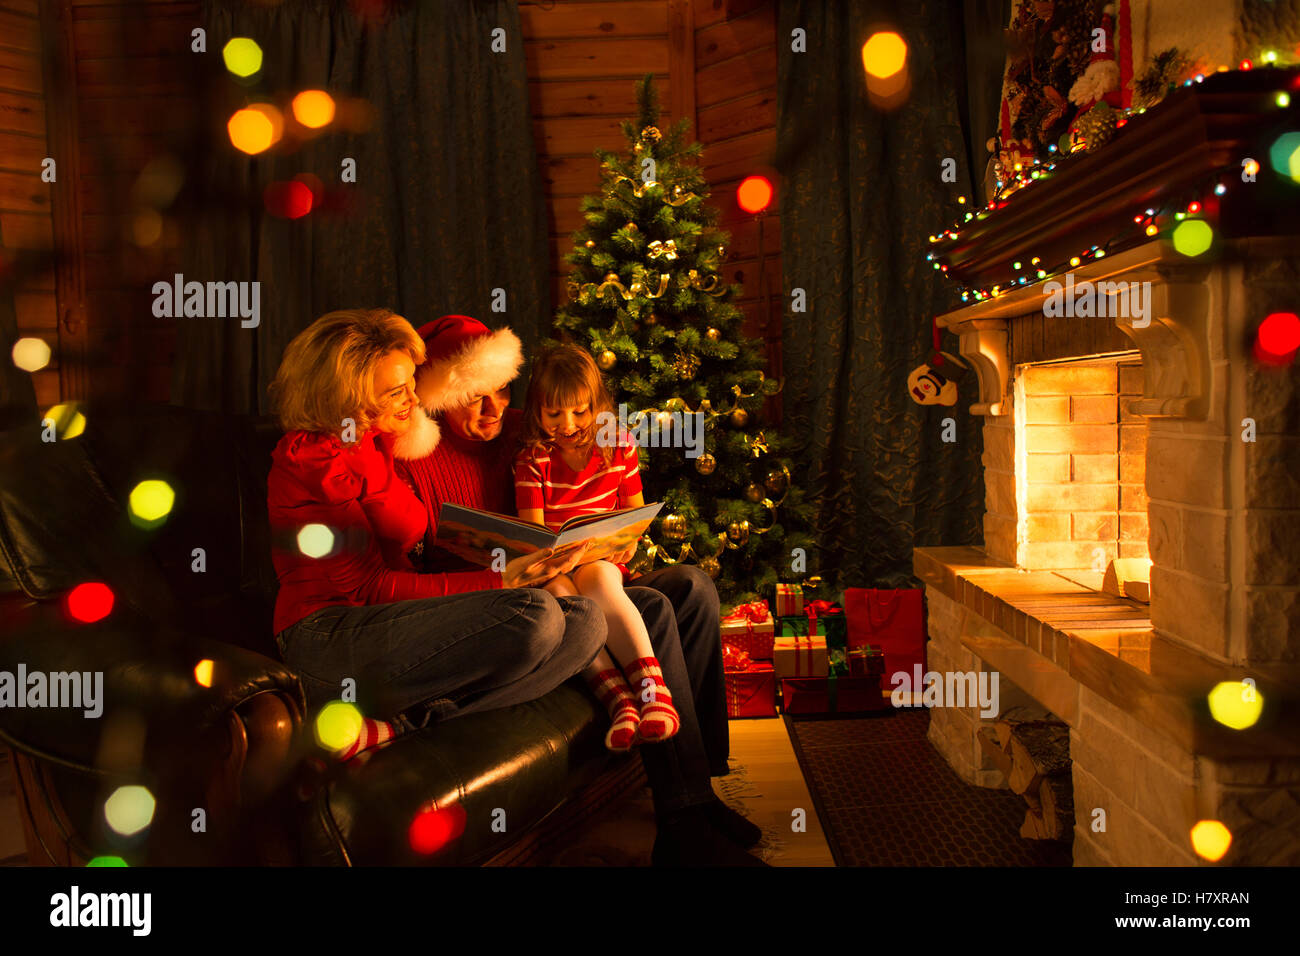 Family read book sitting on sofa in front of fireplace in Christmas decorated house interior Stock Photo